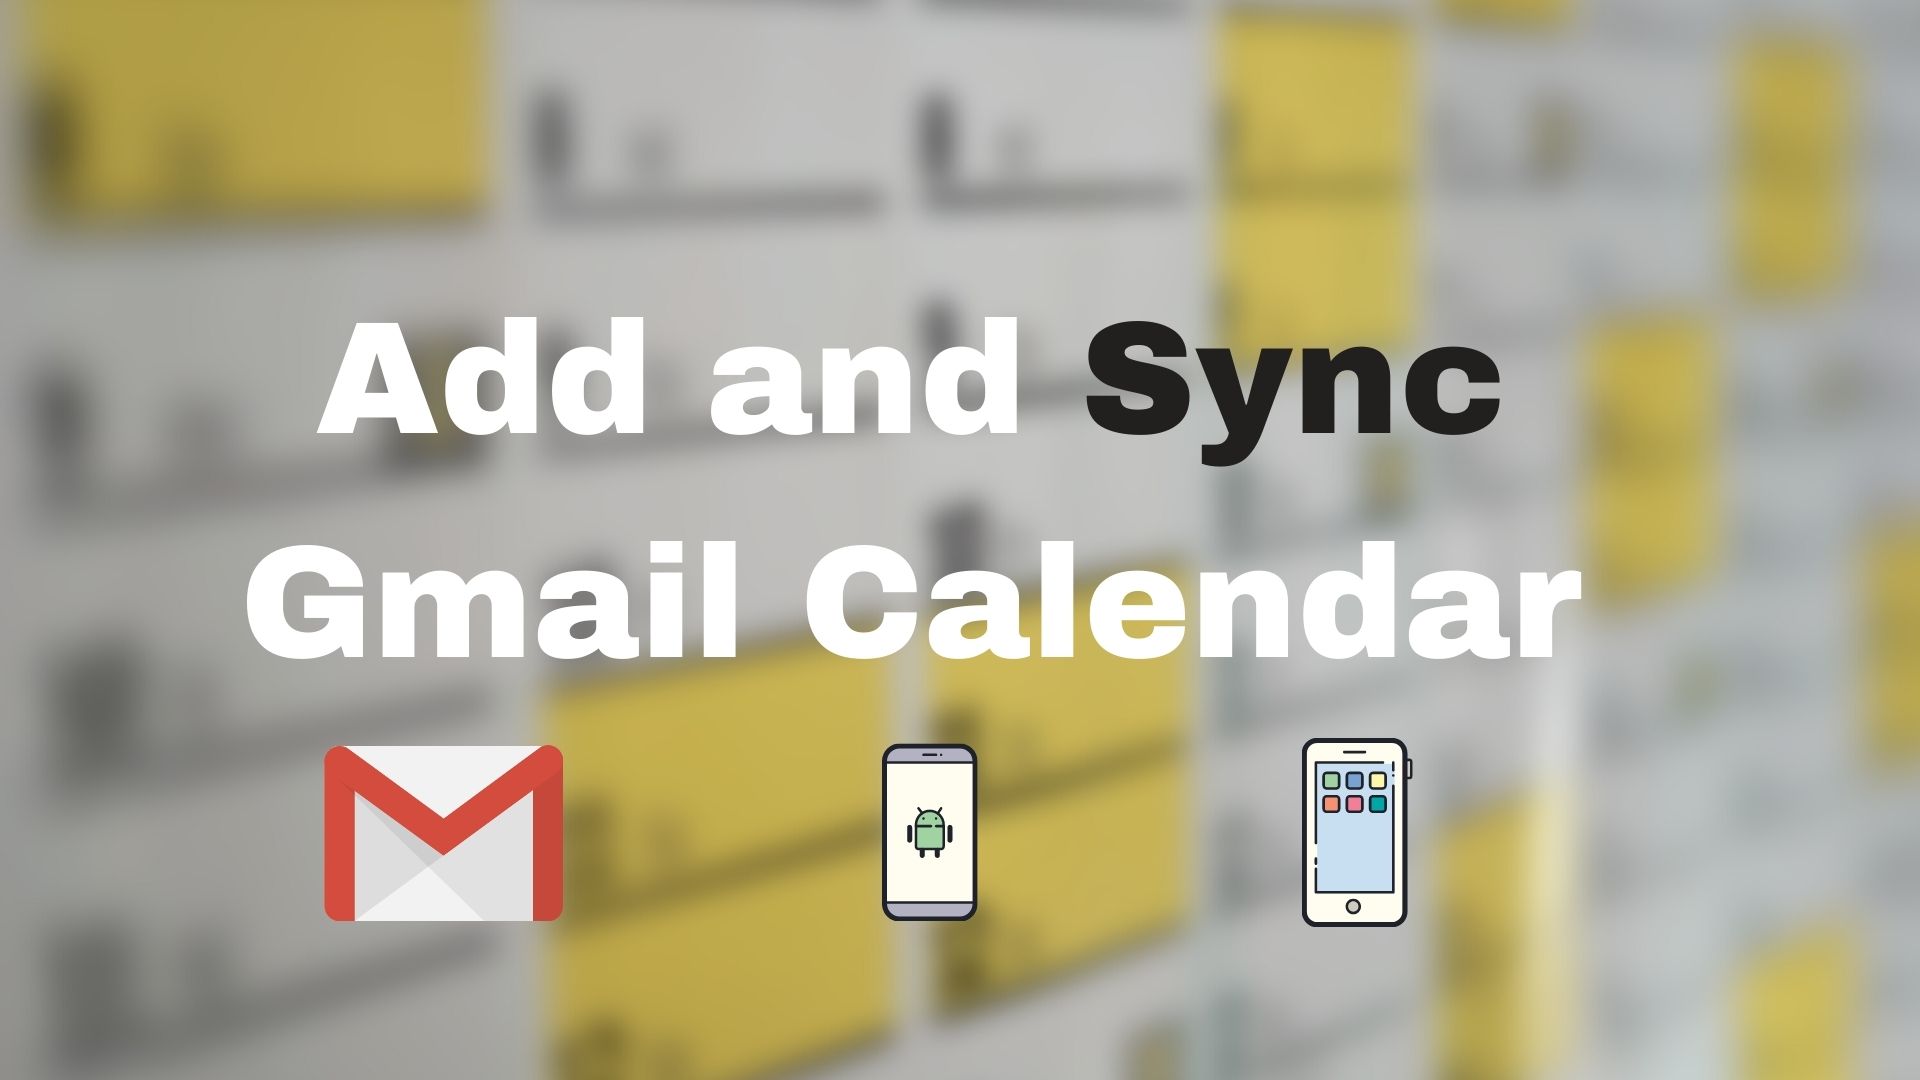 How to Add and Sync Gmail Calendar with Android and iOS?